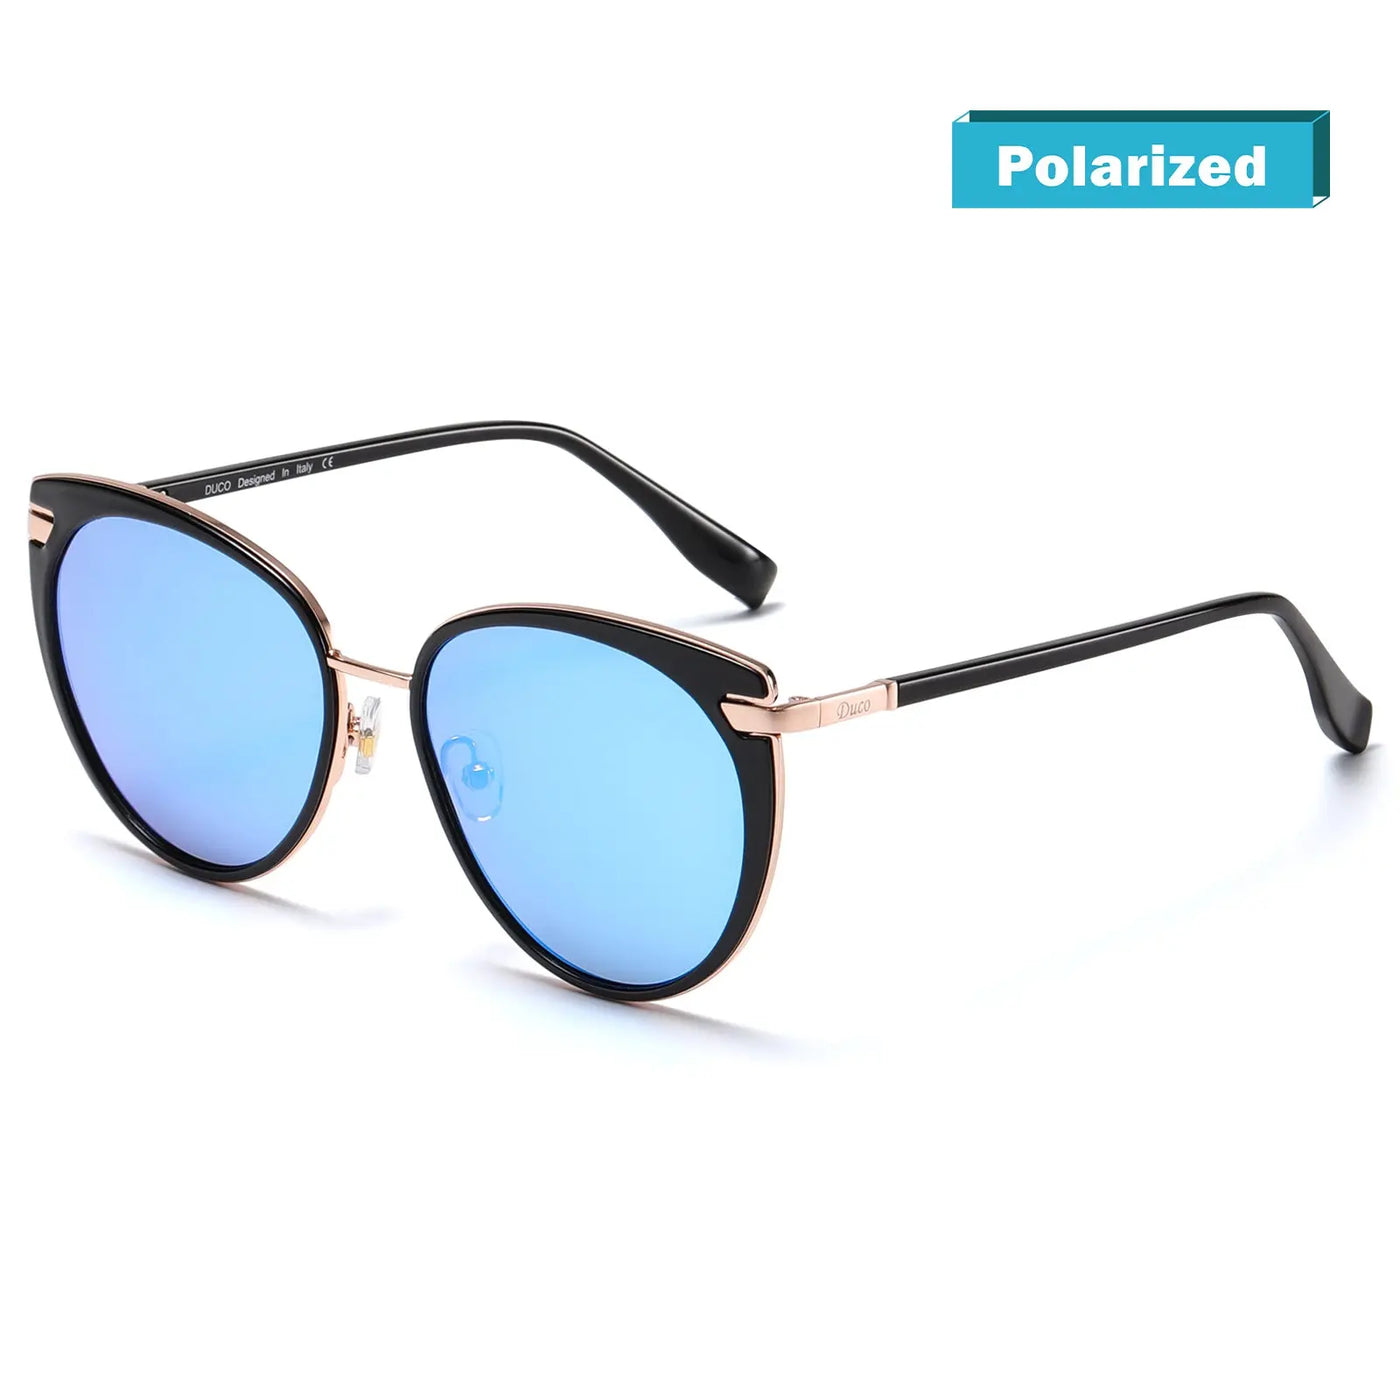 DUCO GLASSES-The right kind of shady DUCO Fashion Metal Round Designer Sunglasses for Women-Polarized Classic Vintage Retro Shades DC1222 New DUCO Women